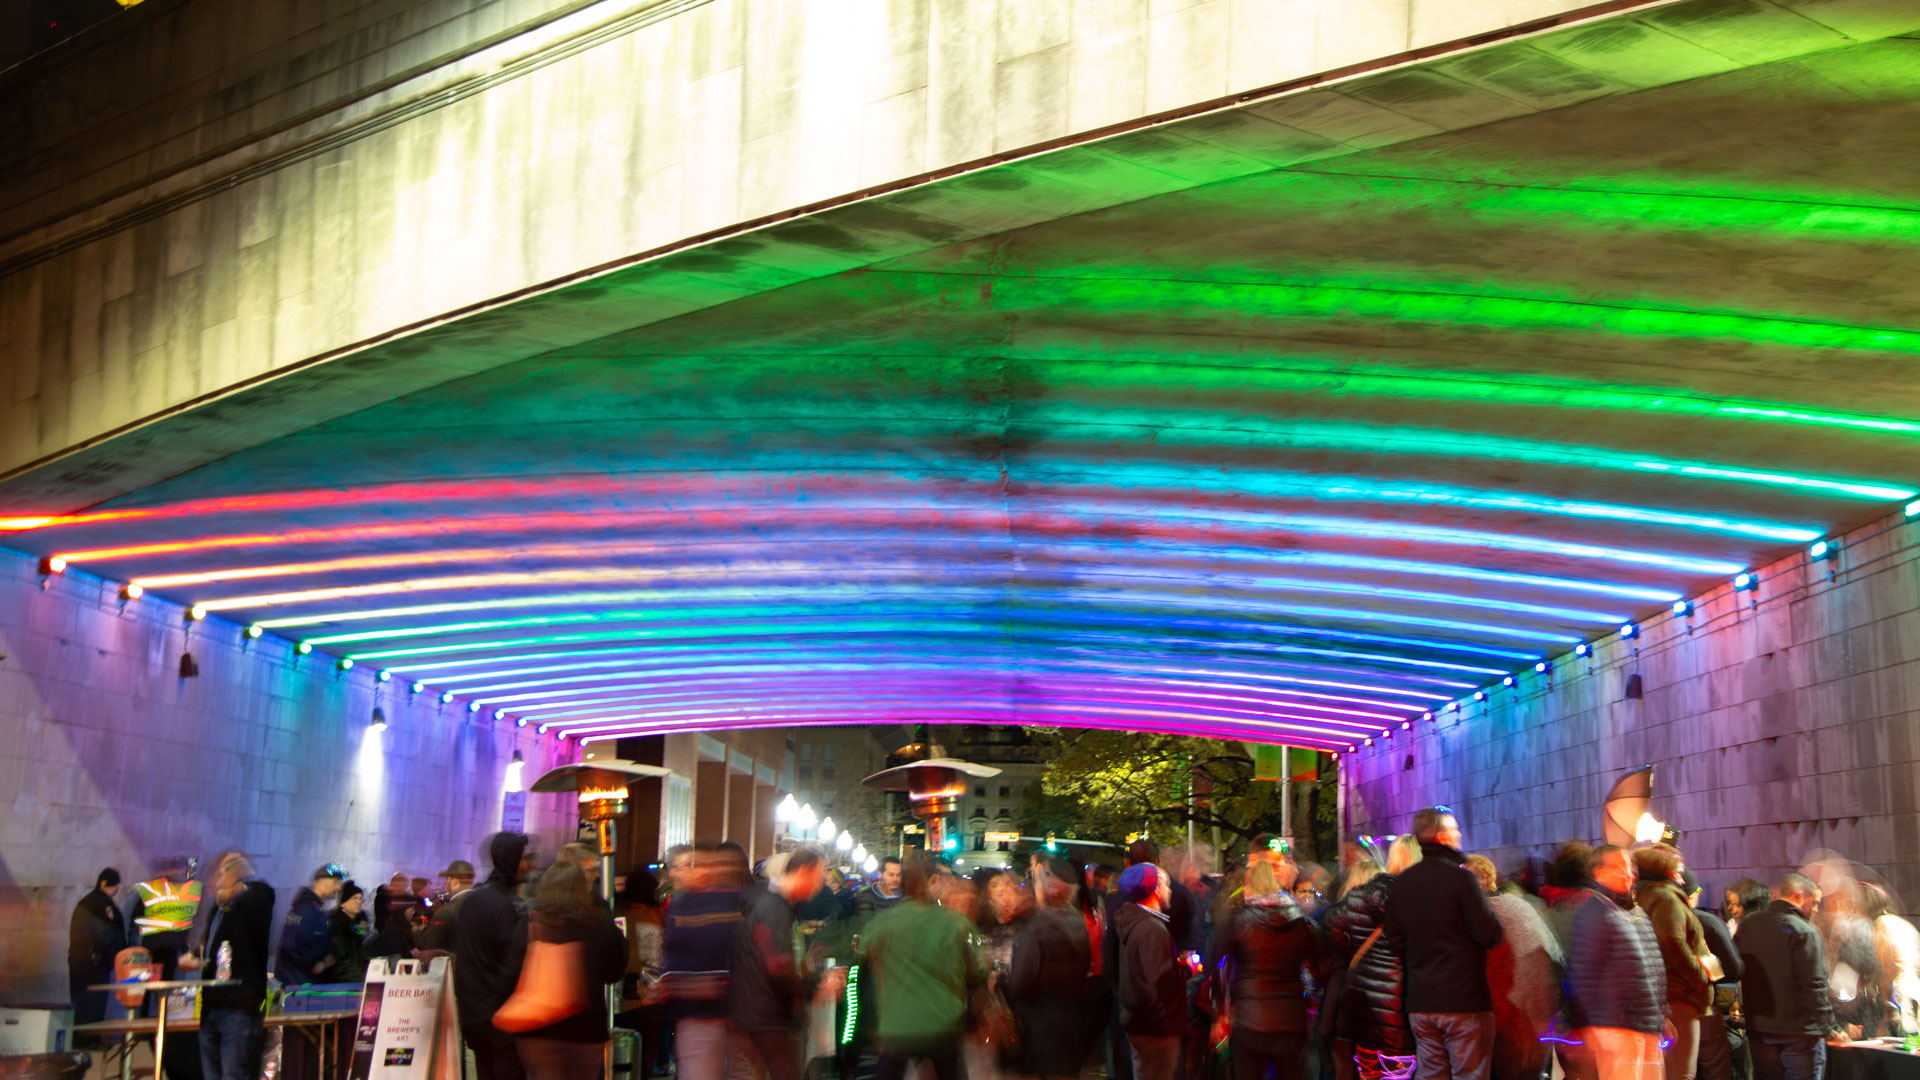 Crowd under colorful viaduct lights for Downtown Partnership's Lit City event.